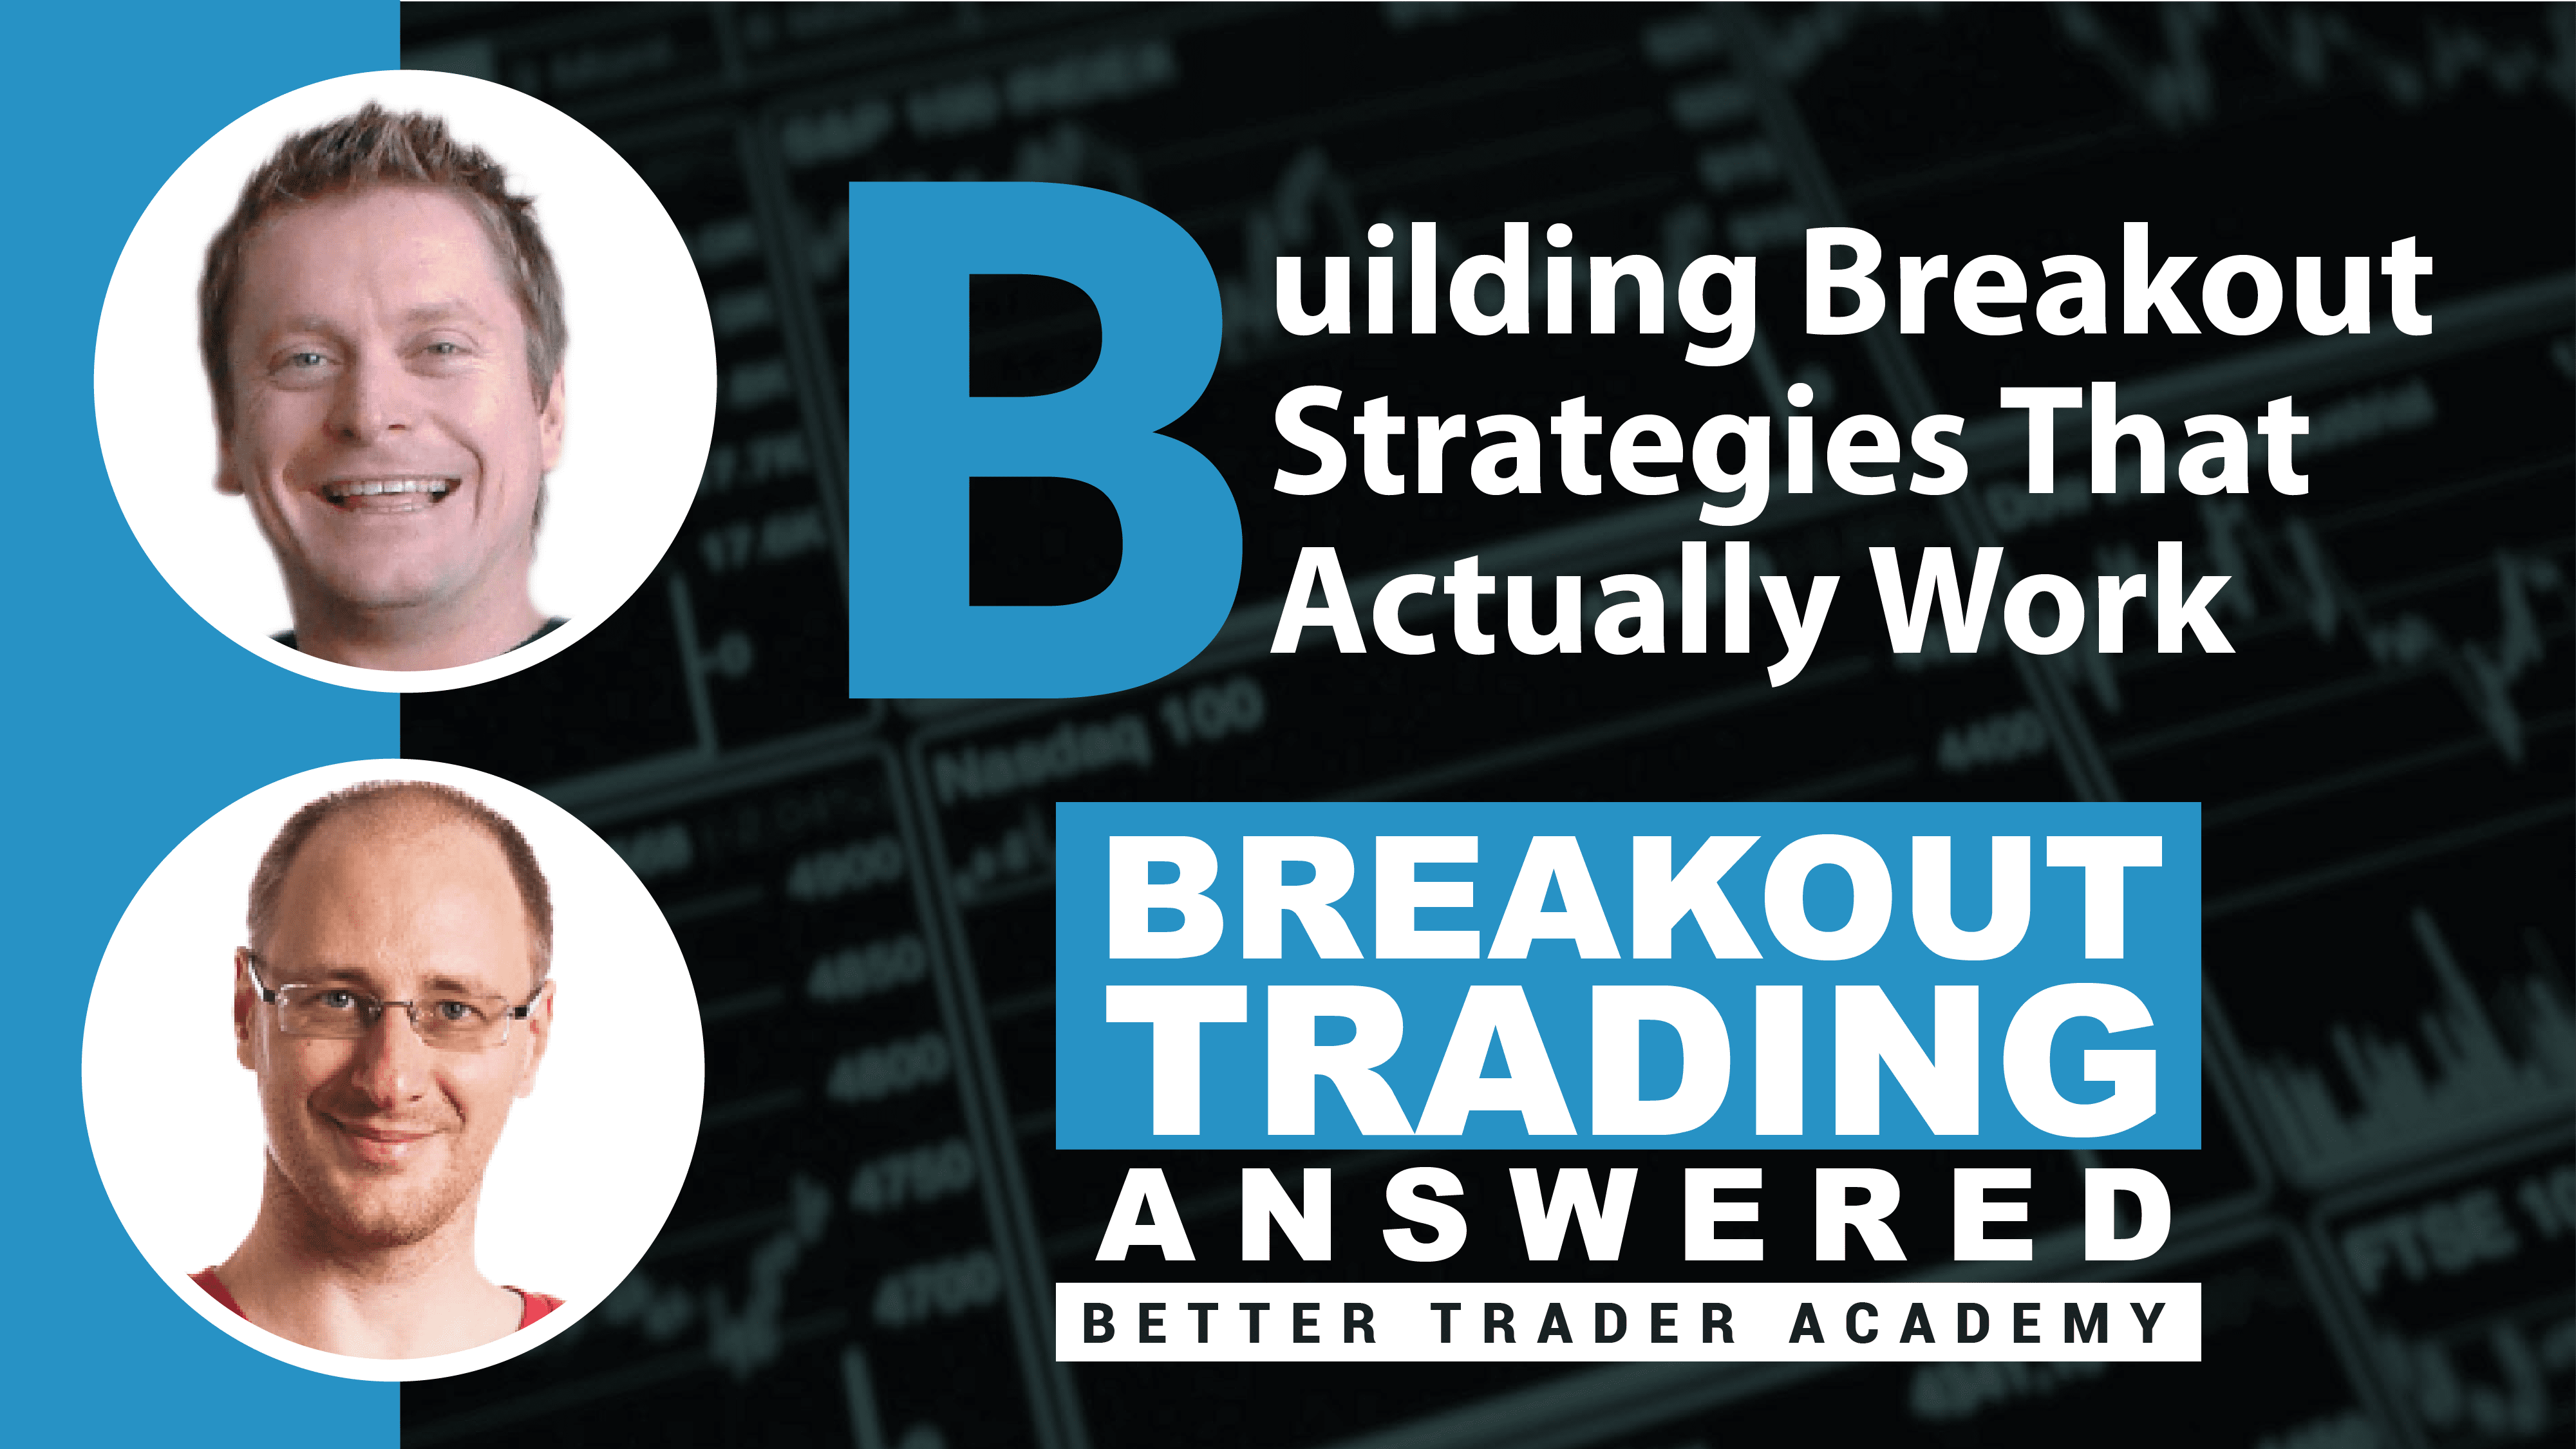 Building Breakout Strategies That Actually Work